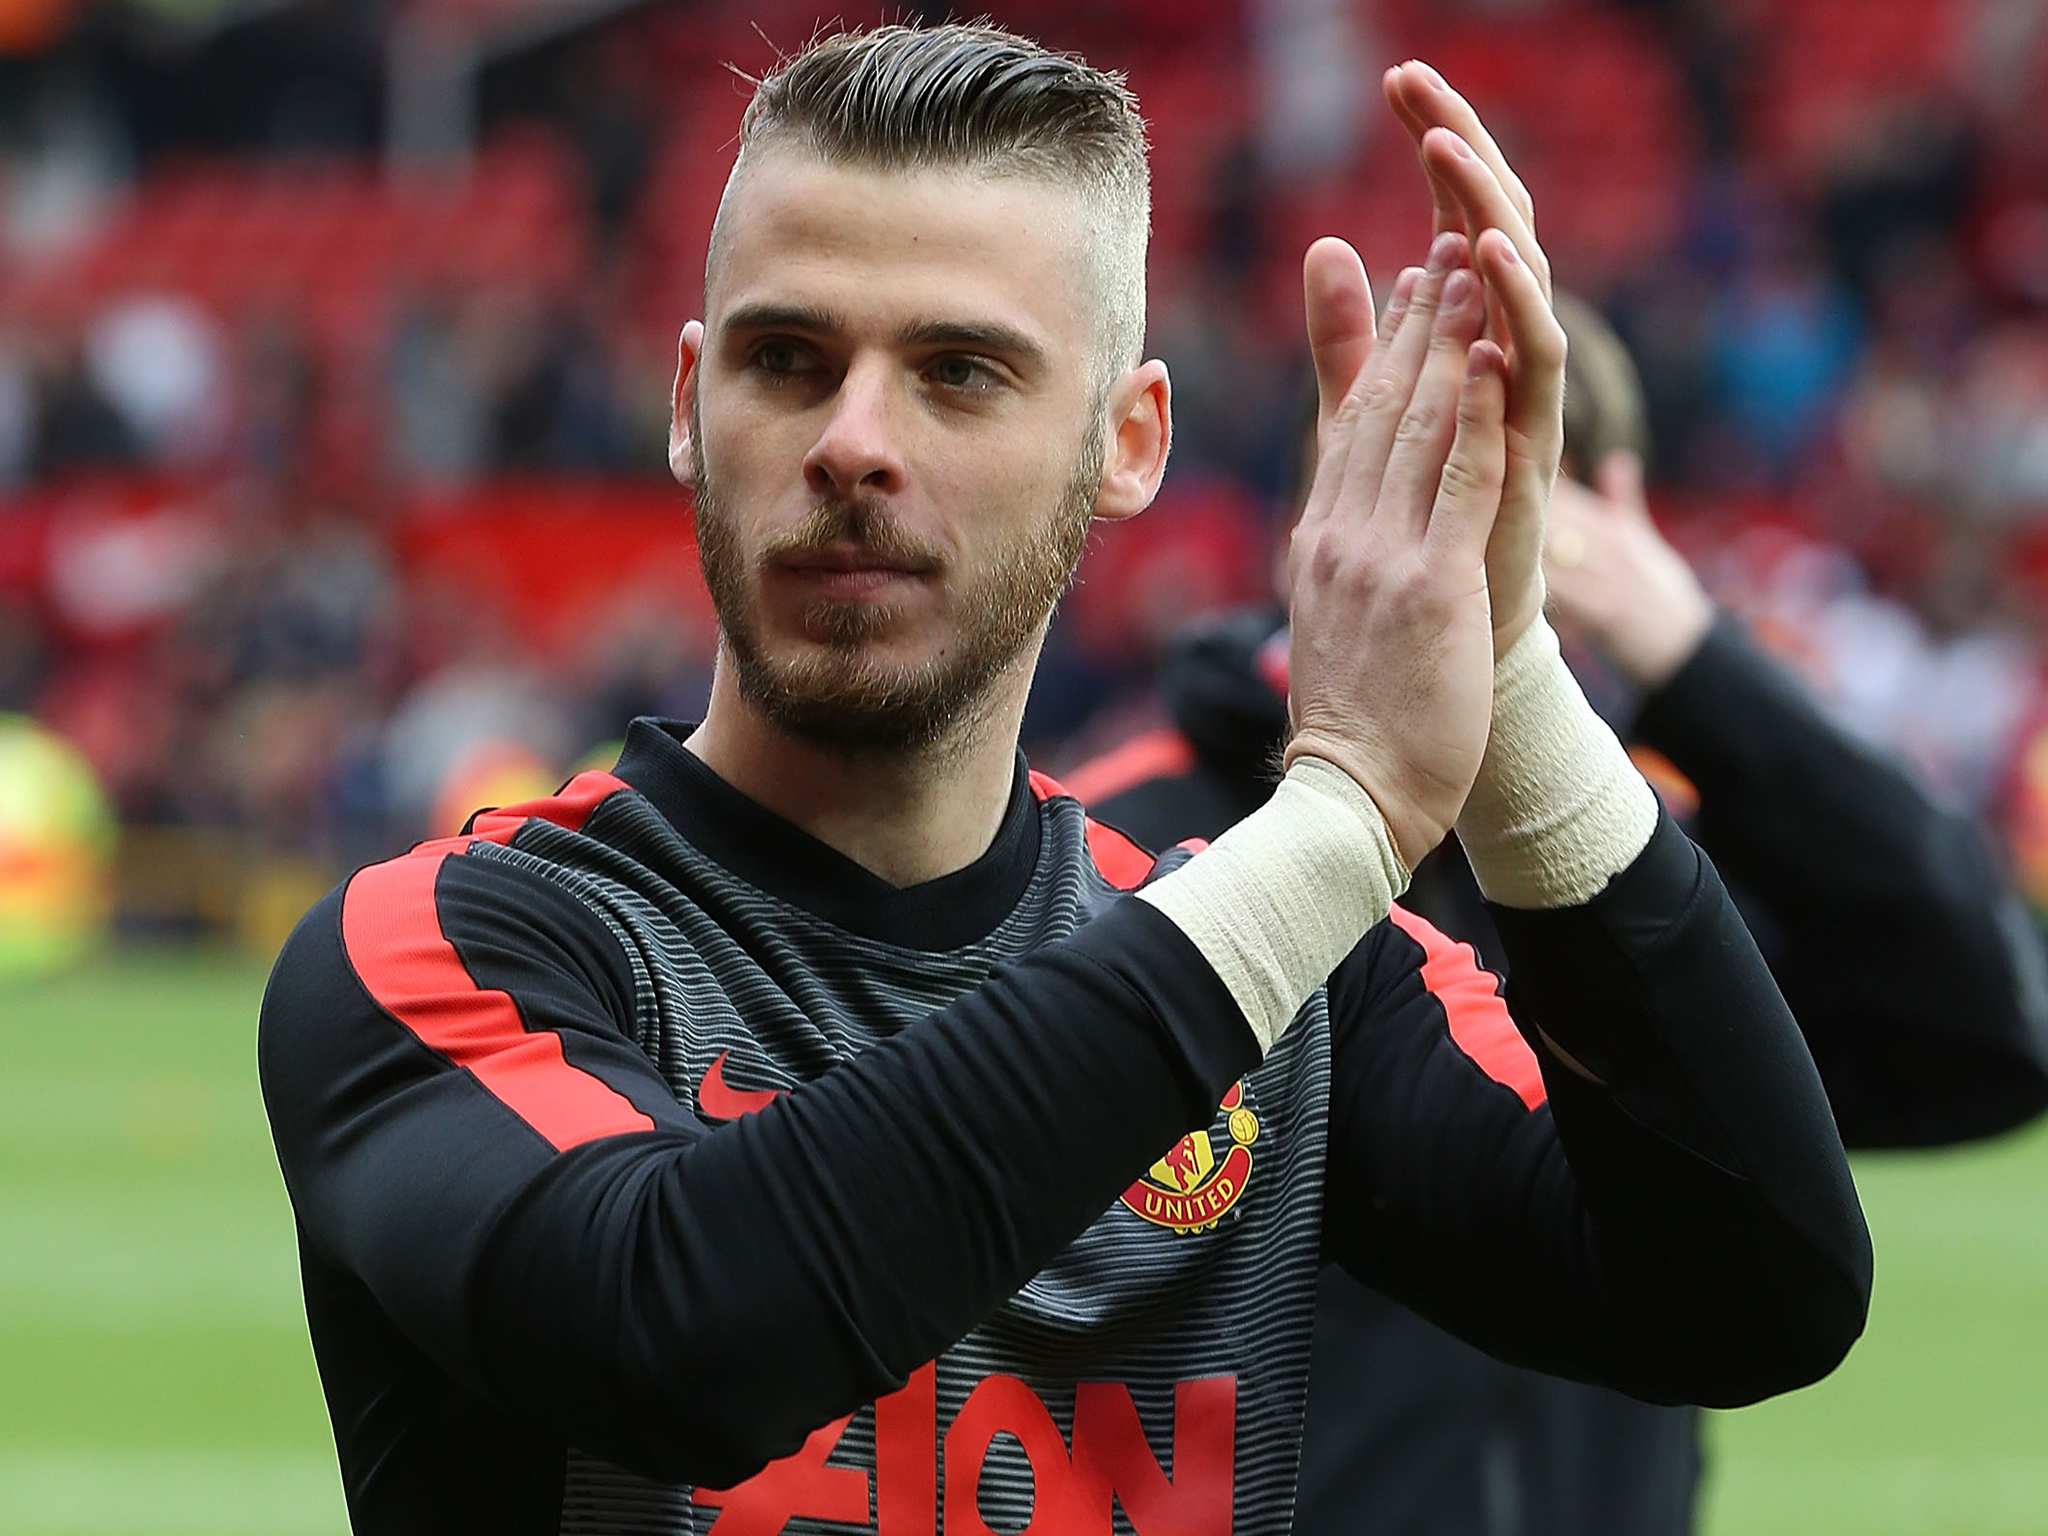 Spain Soccer David De Gea Clapping Mobile Free Hd Download Pictures